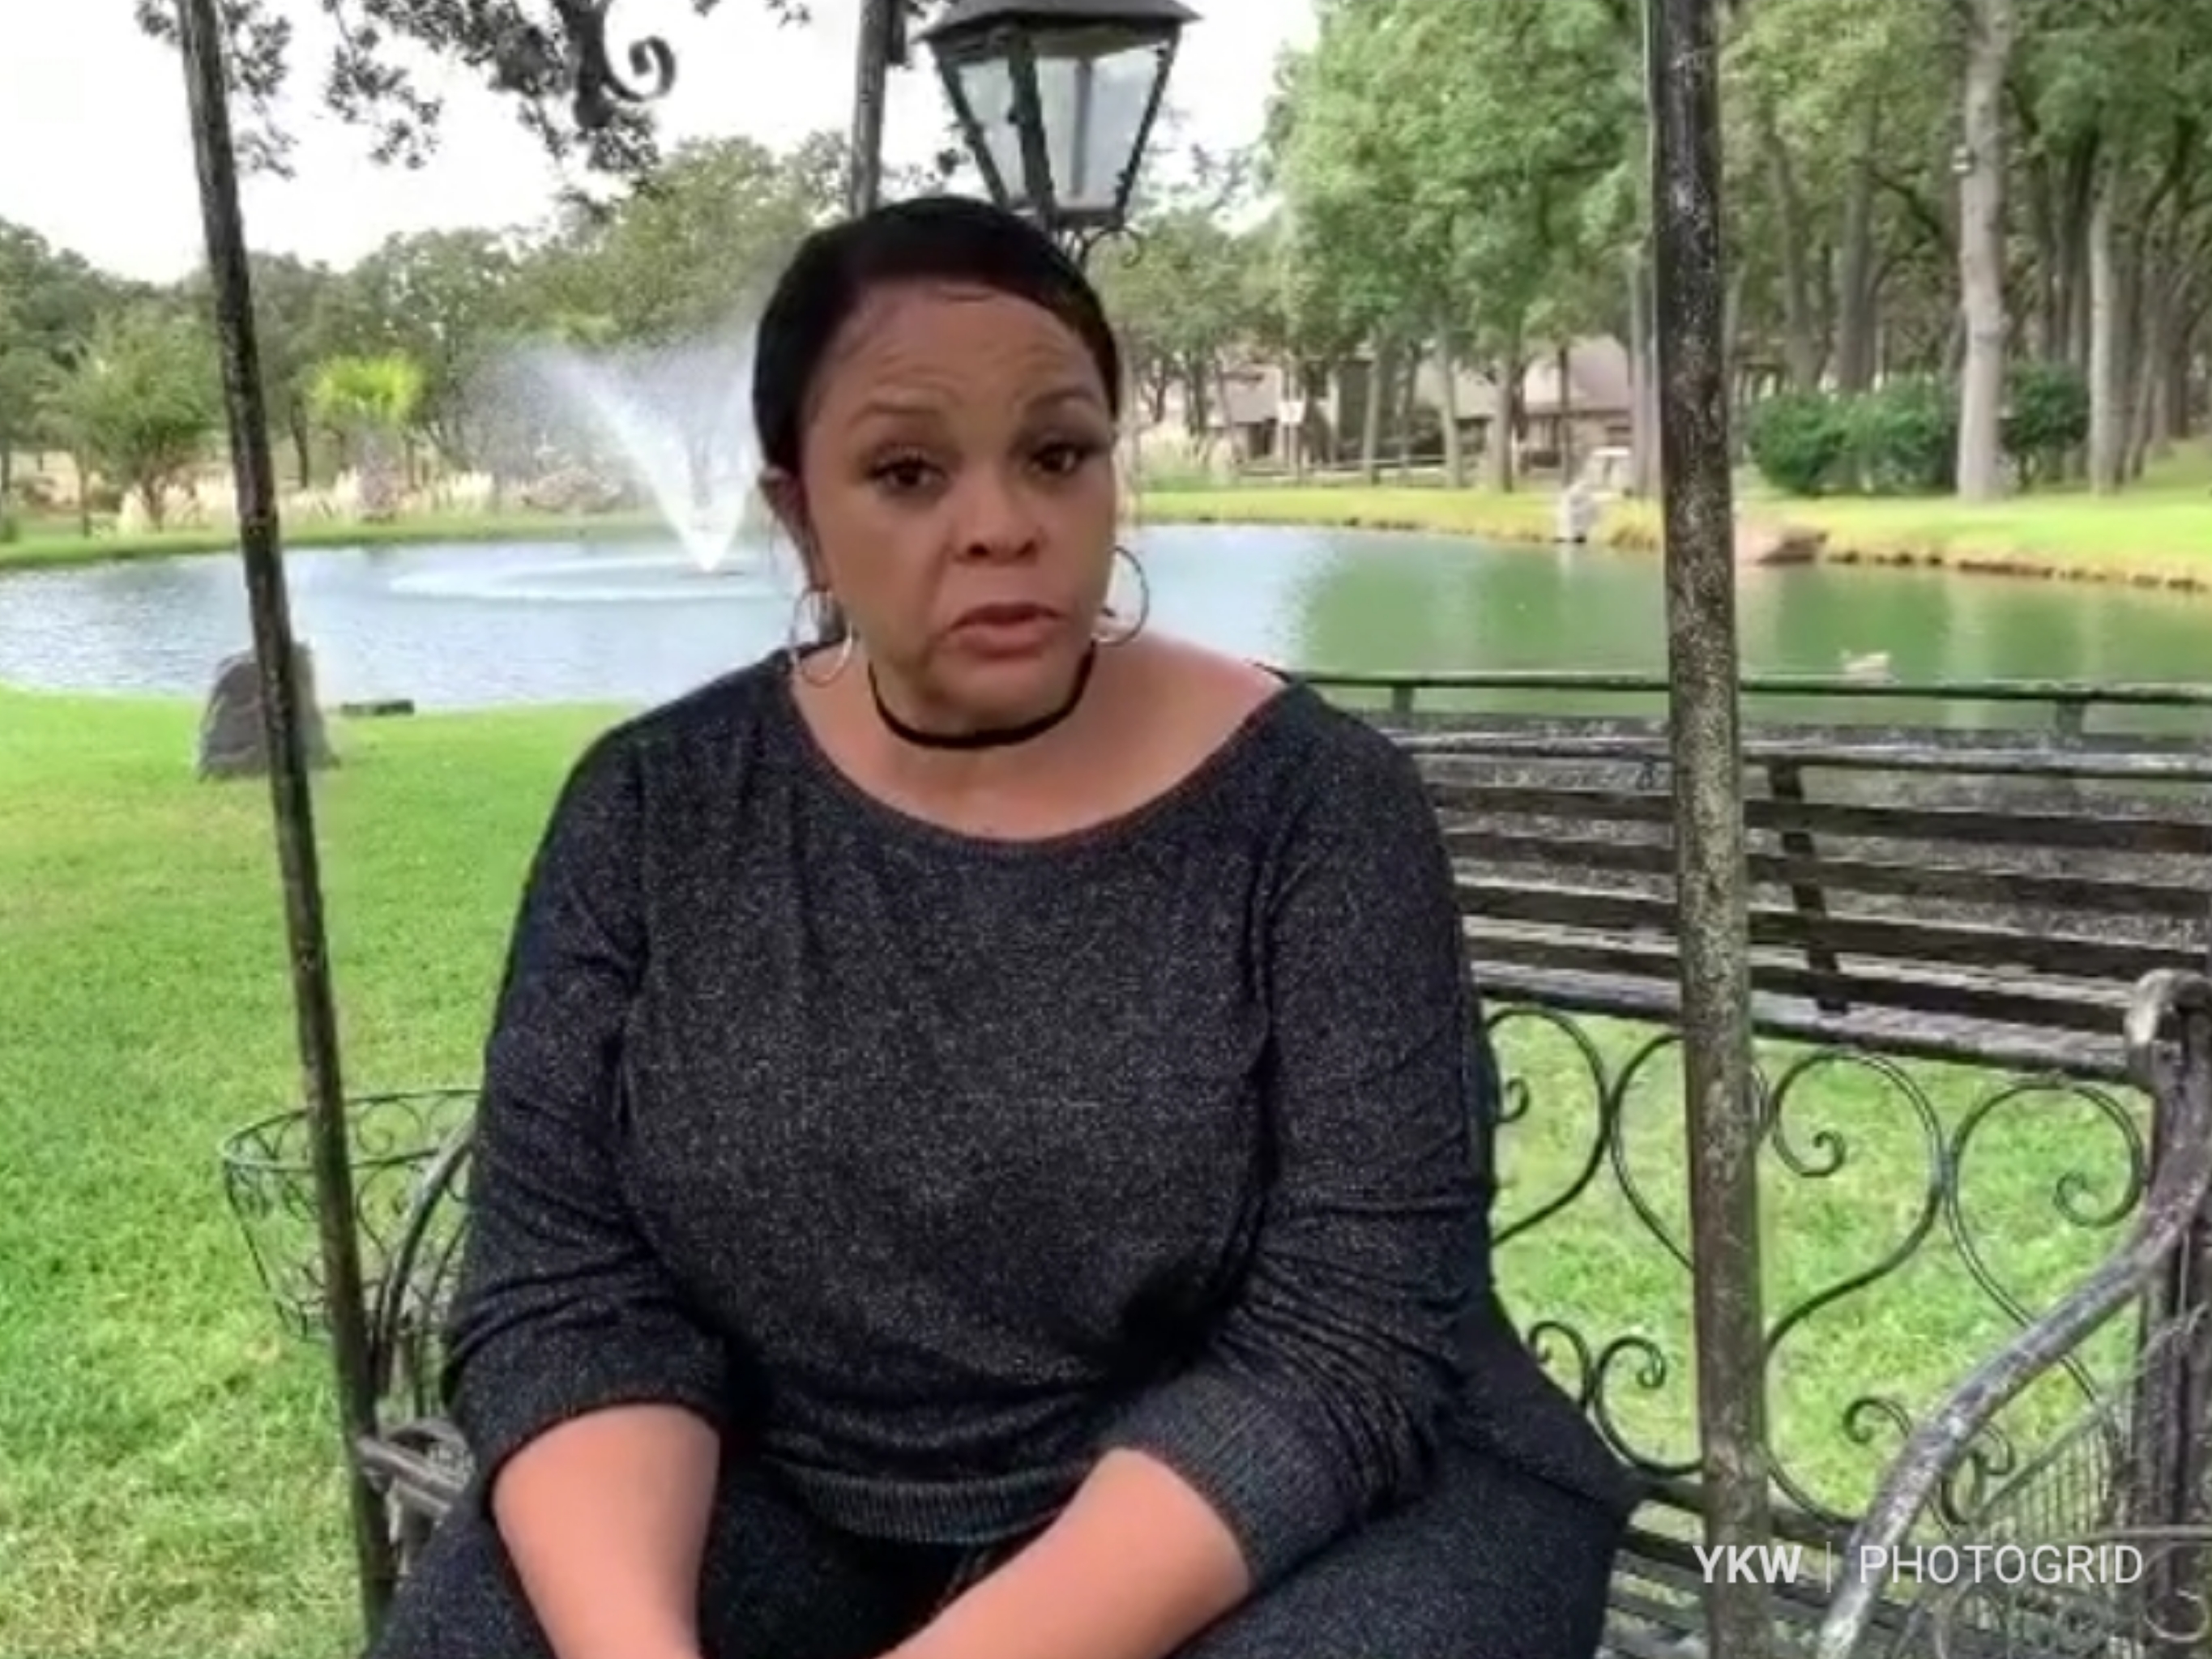 Tamela Mann Encourages Everyone To Take Care Of Themselves On Mental Health Day